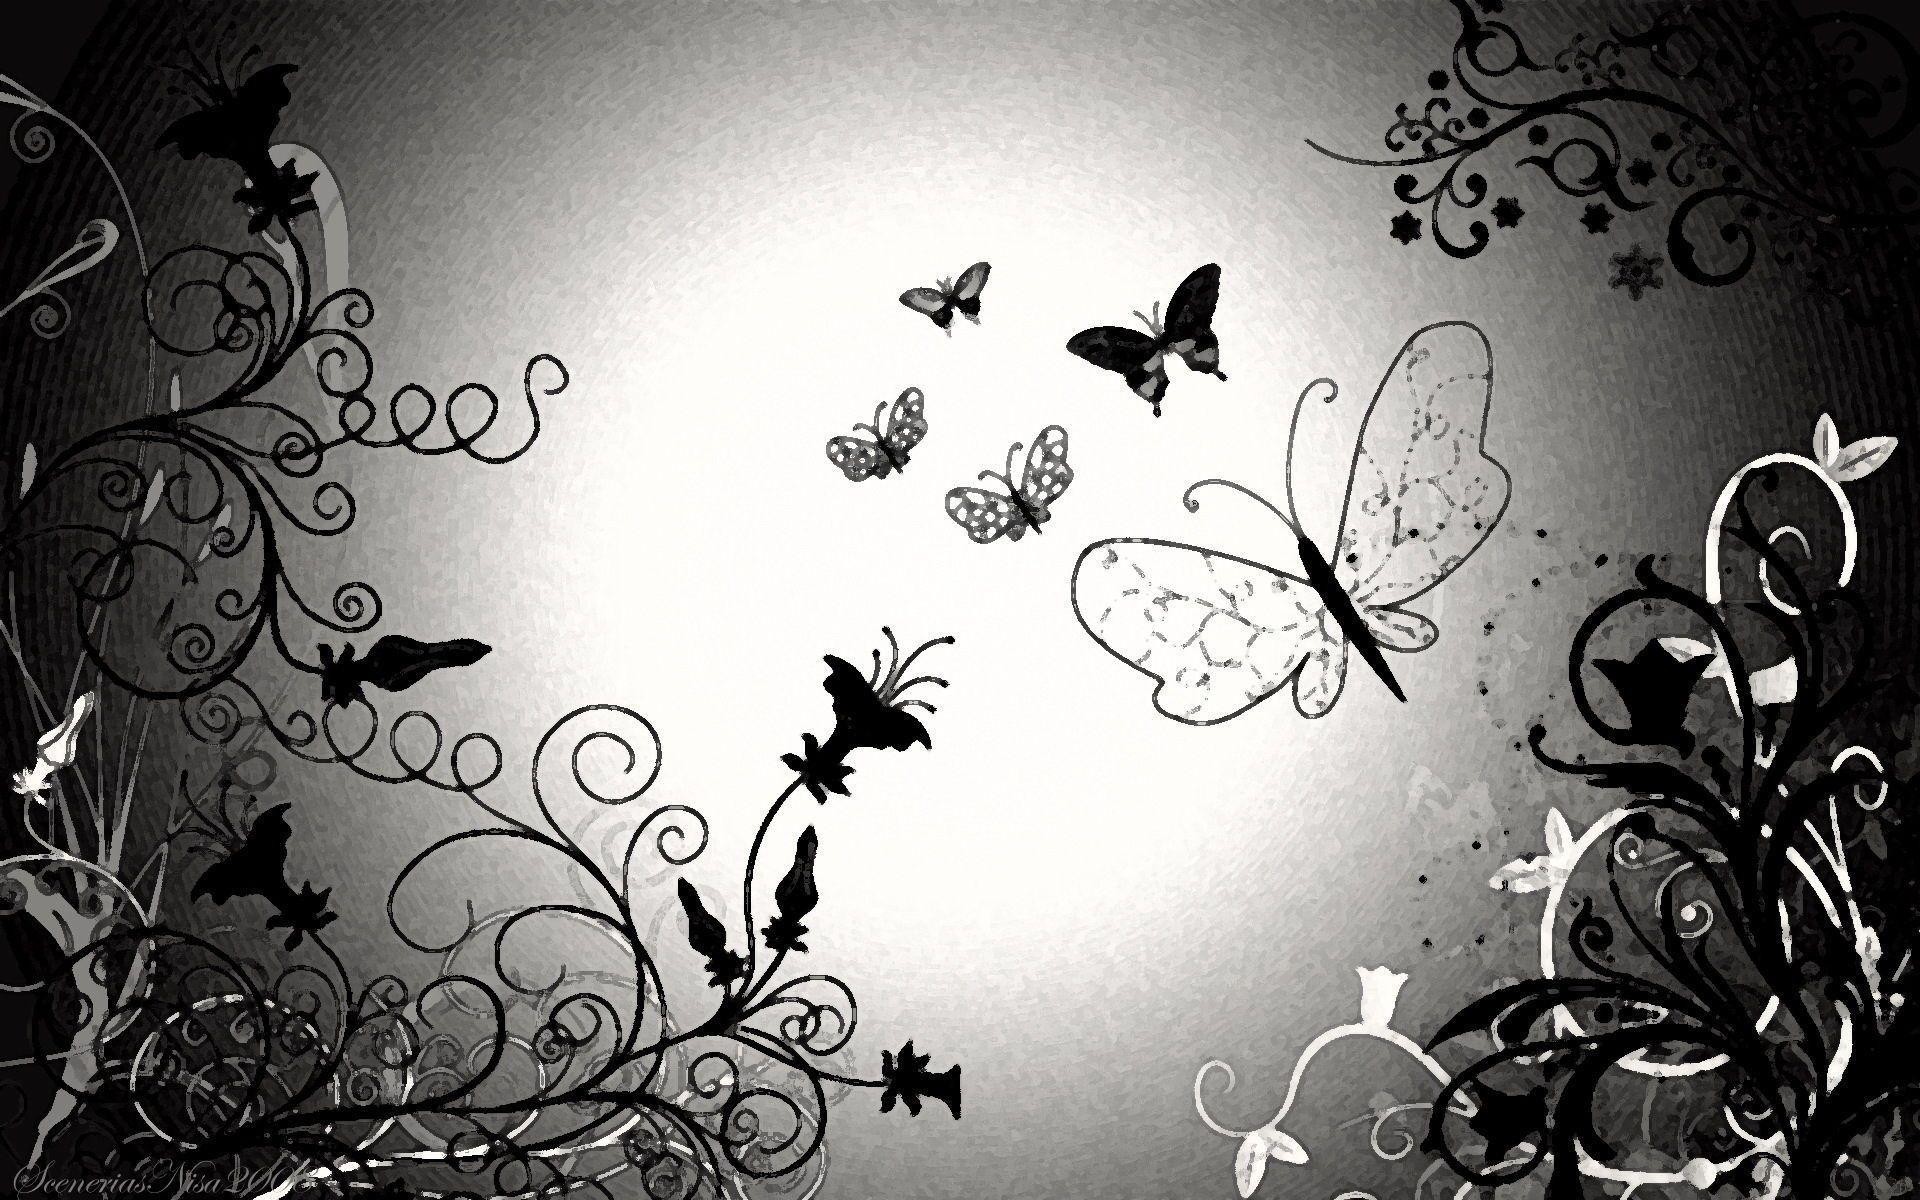 Black Butterfly Wallpaper (68+ images)